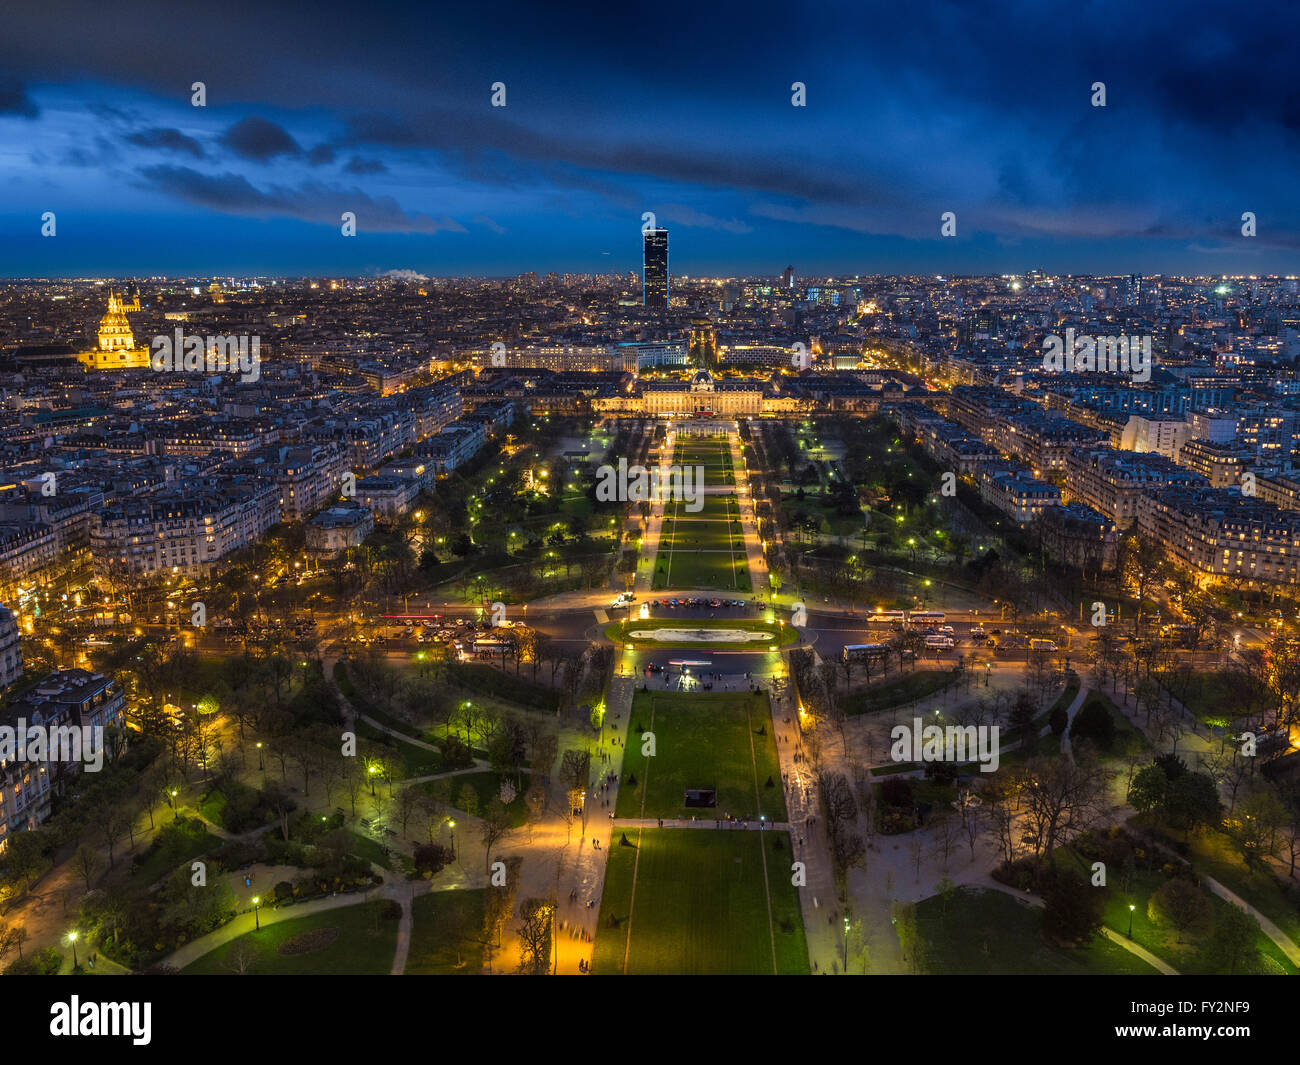 Champ de Mars, with Montparnasse Tower in background at night, Paris, France. Stock Photo